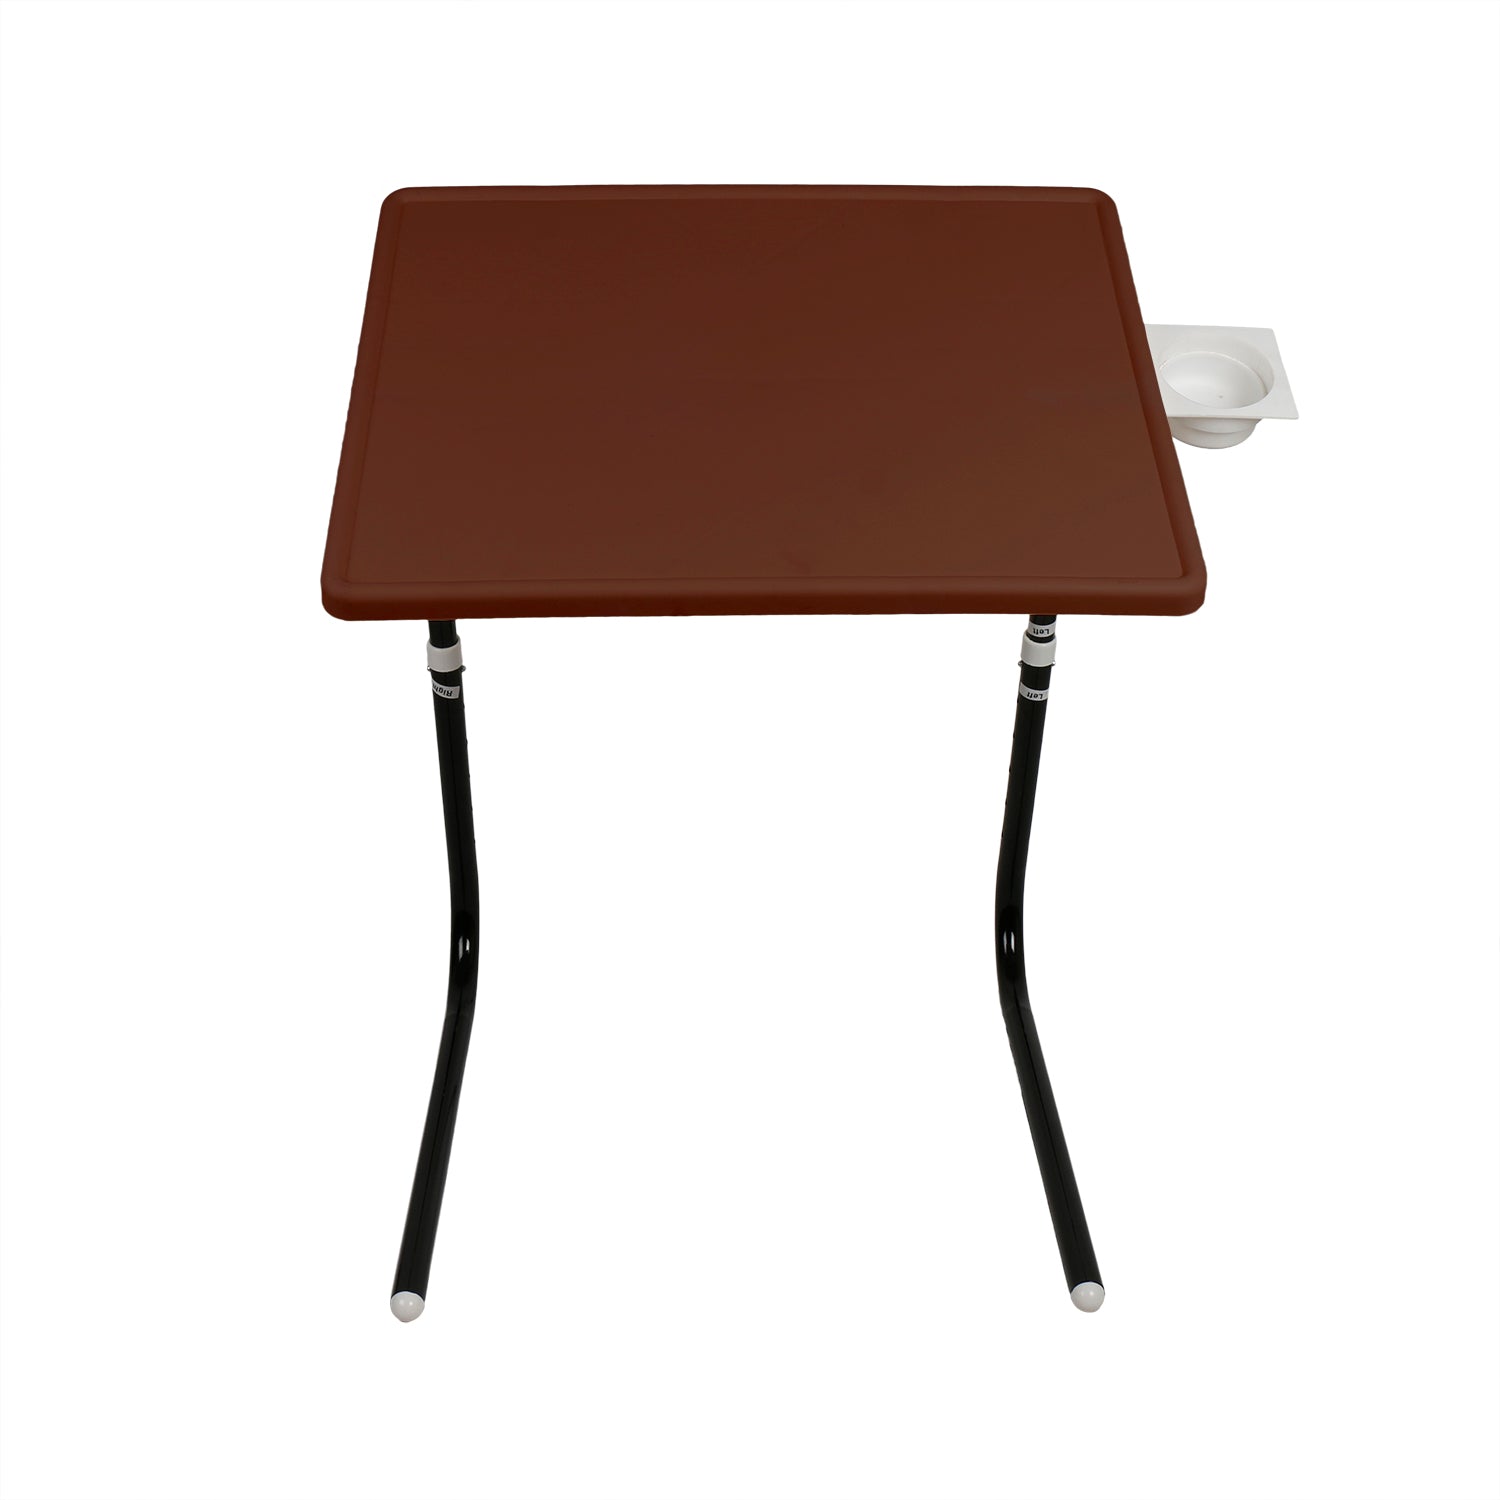 Table mate with brown finishing | Wudore